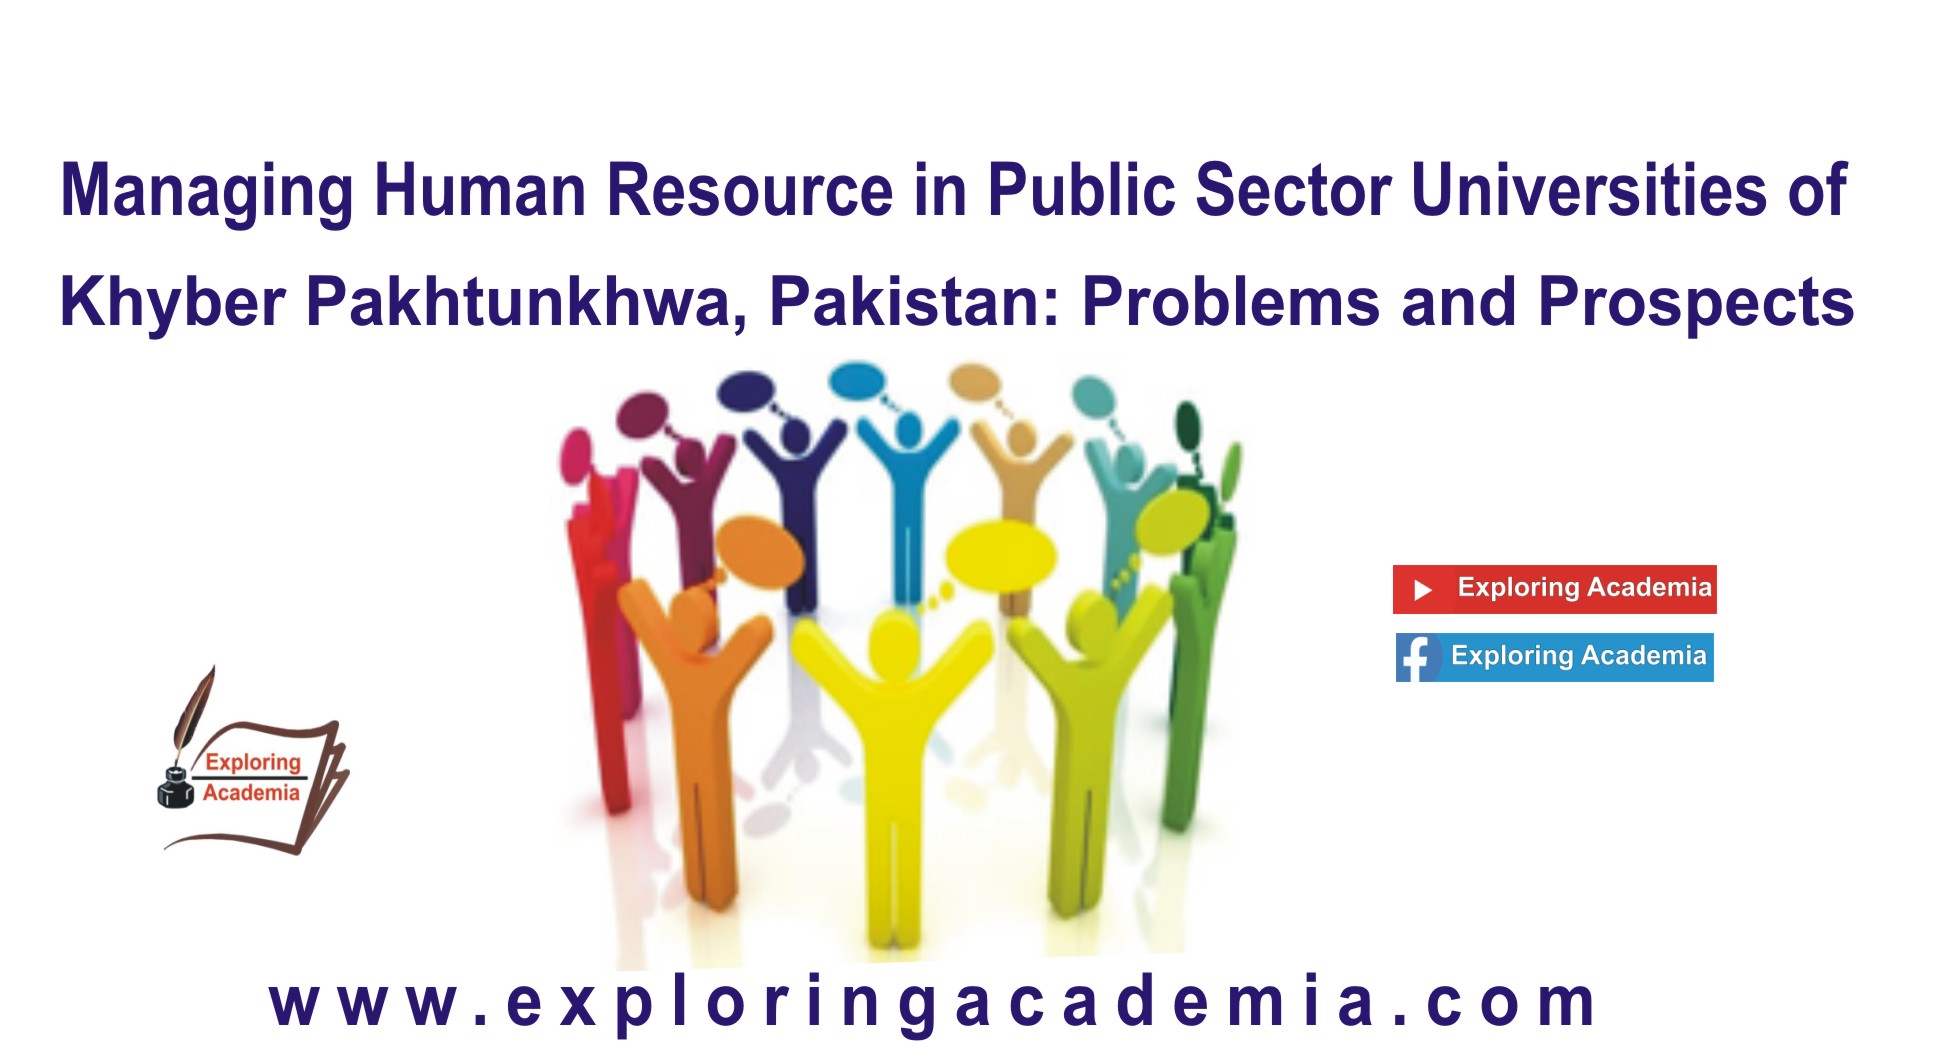 Managing Human Resource in Public Sector Universities of Khyber Pakhtunkhwa, Pakistan: Problems and Prospects